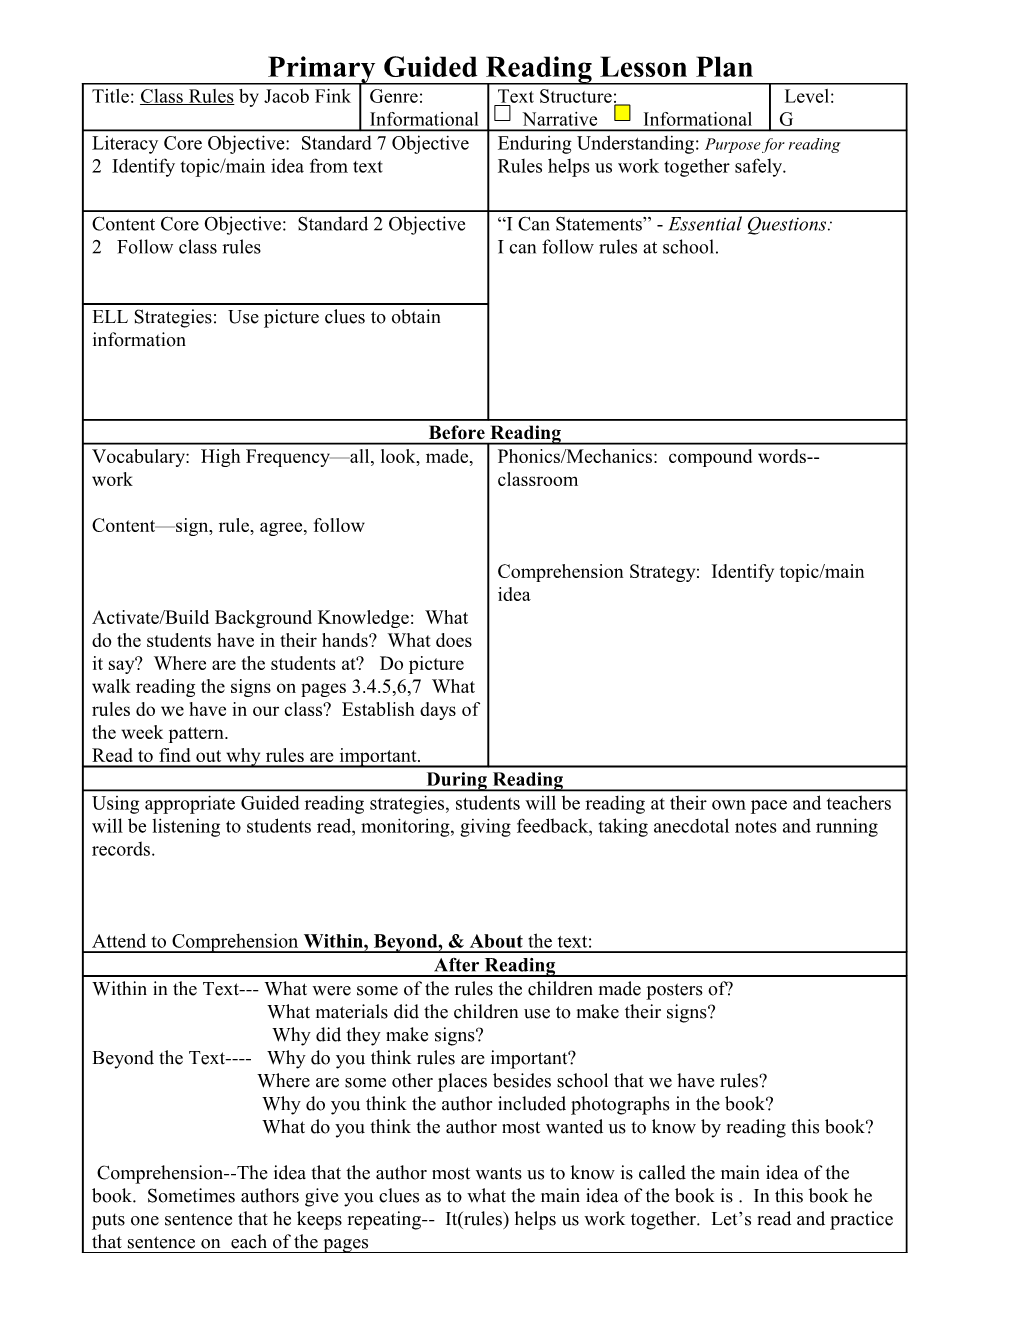 Primary Guided Reading Lesson Plan s10